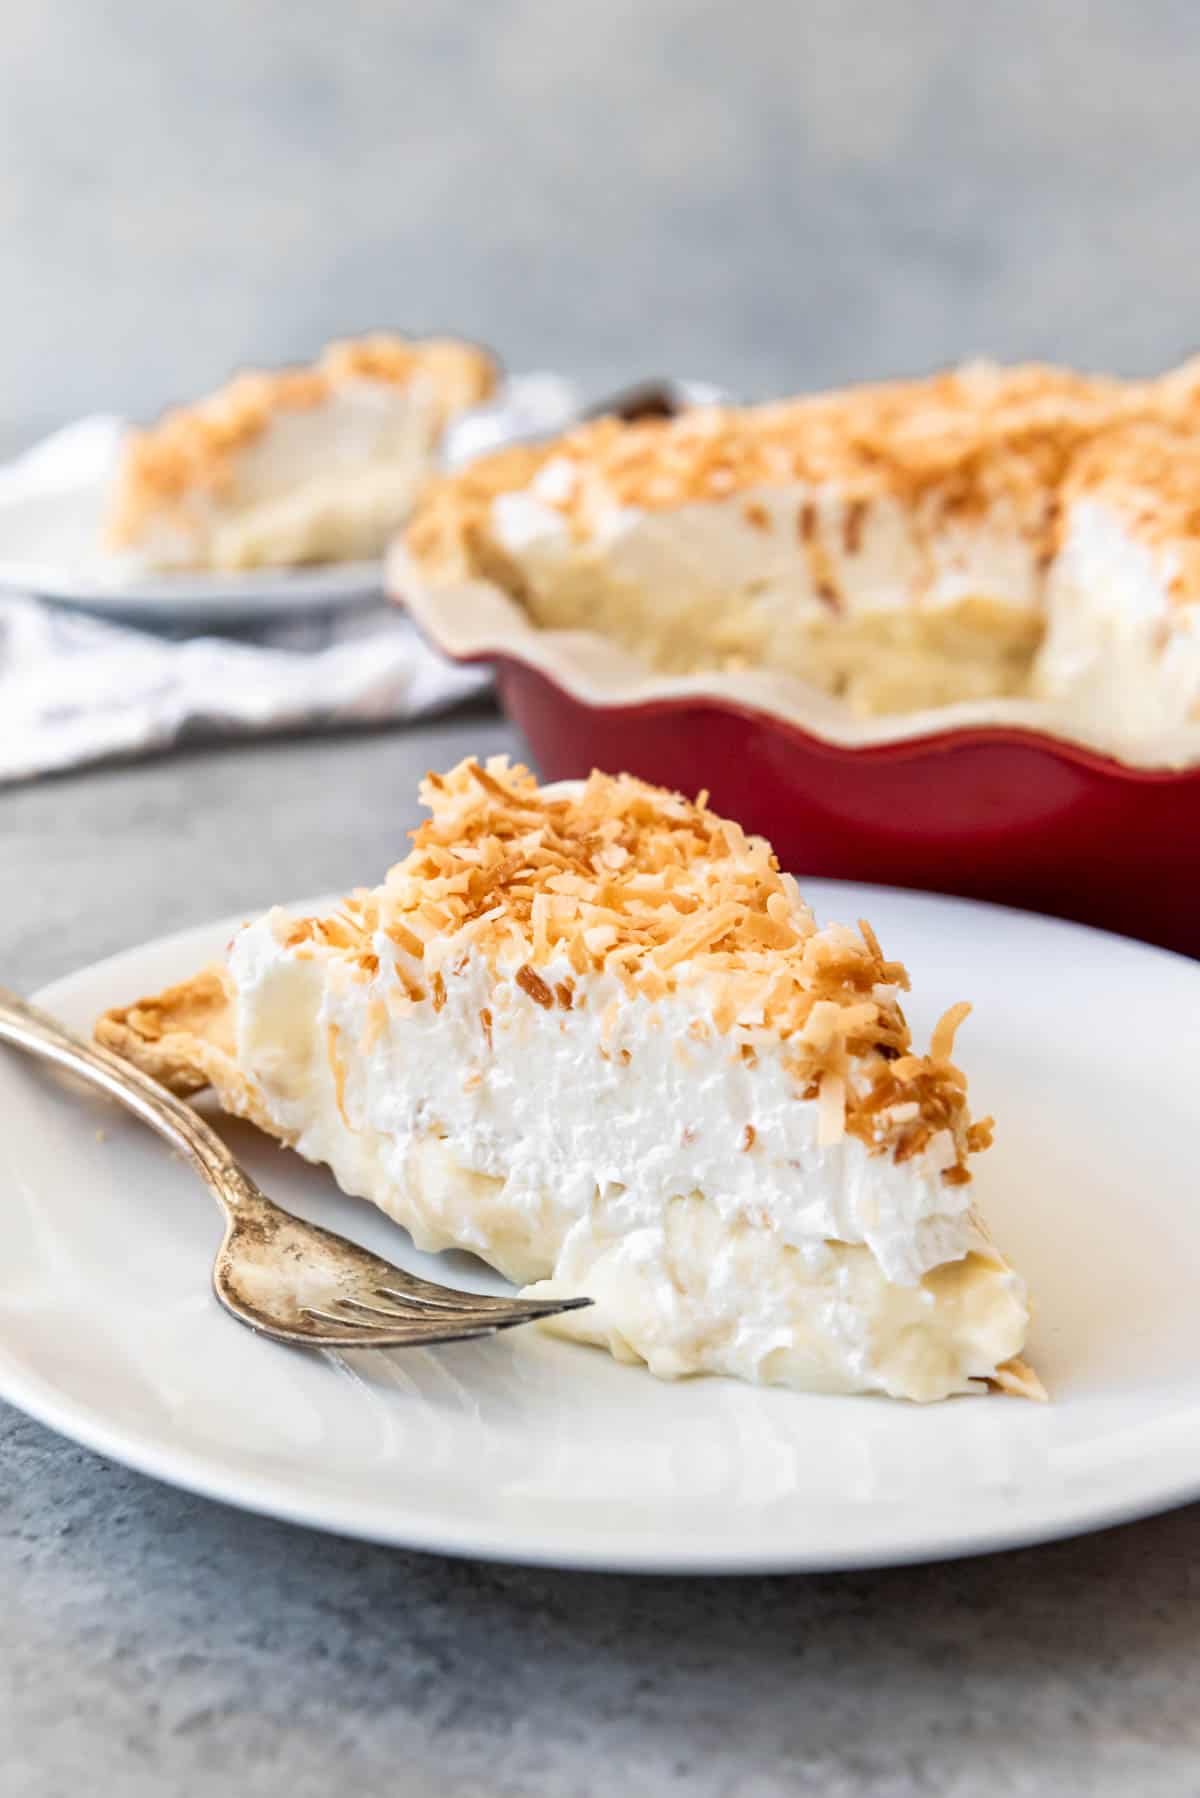 An image of a slice of coconut cream pie made from scratch.